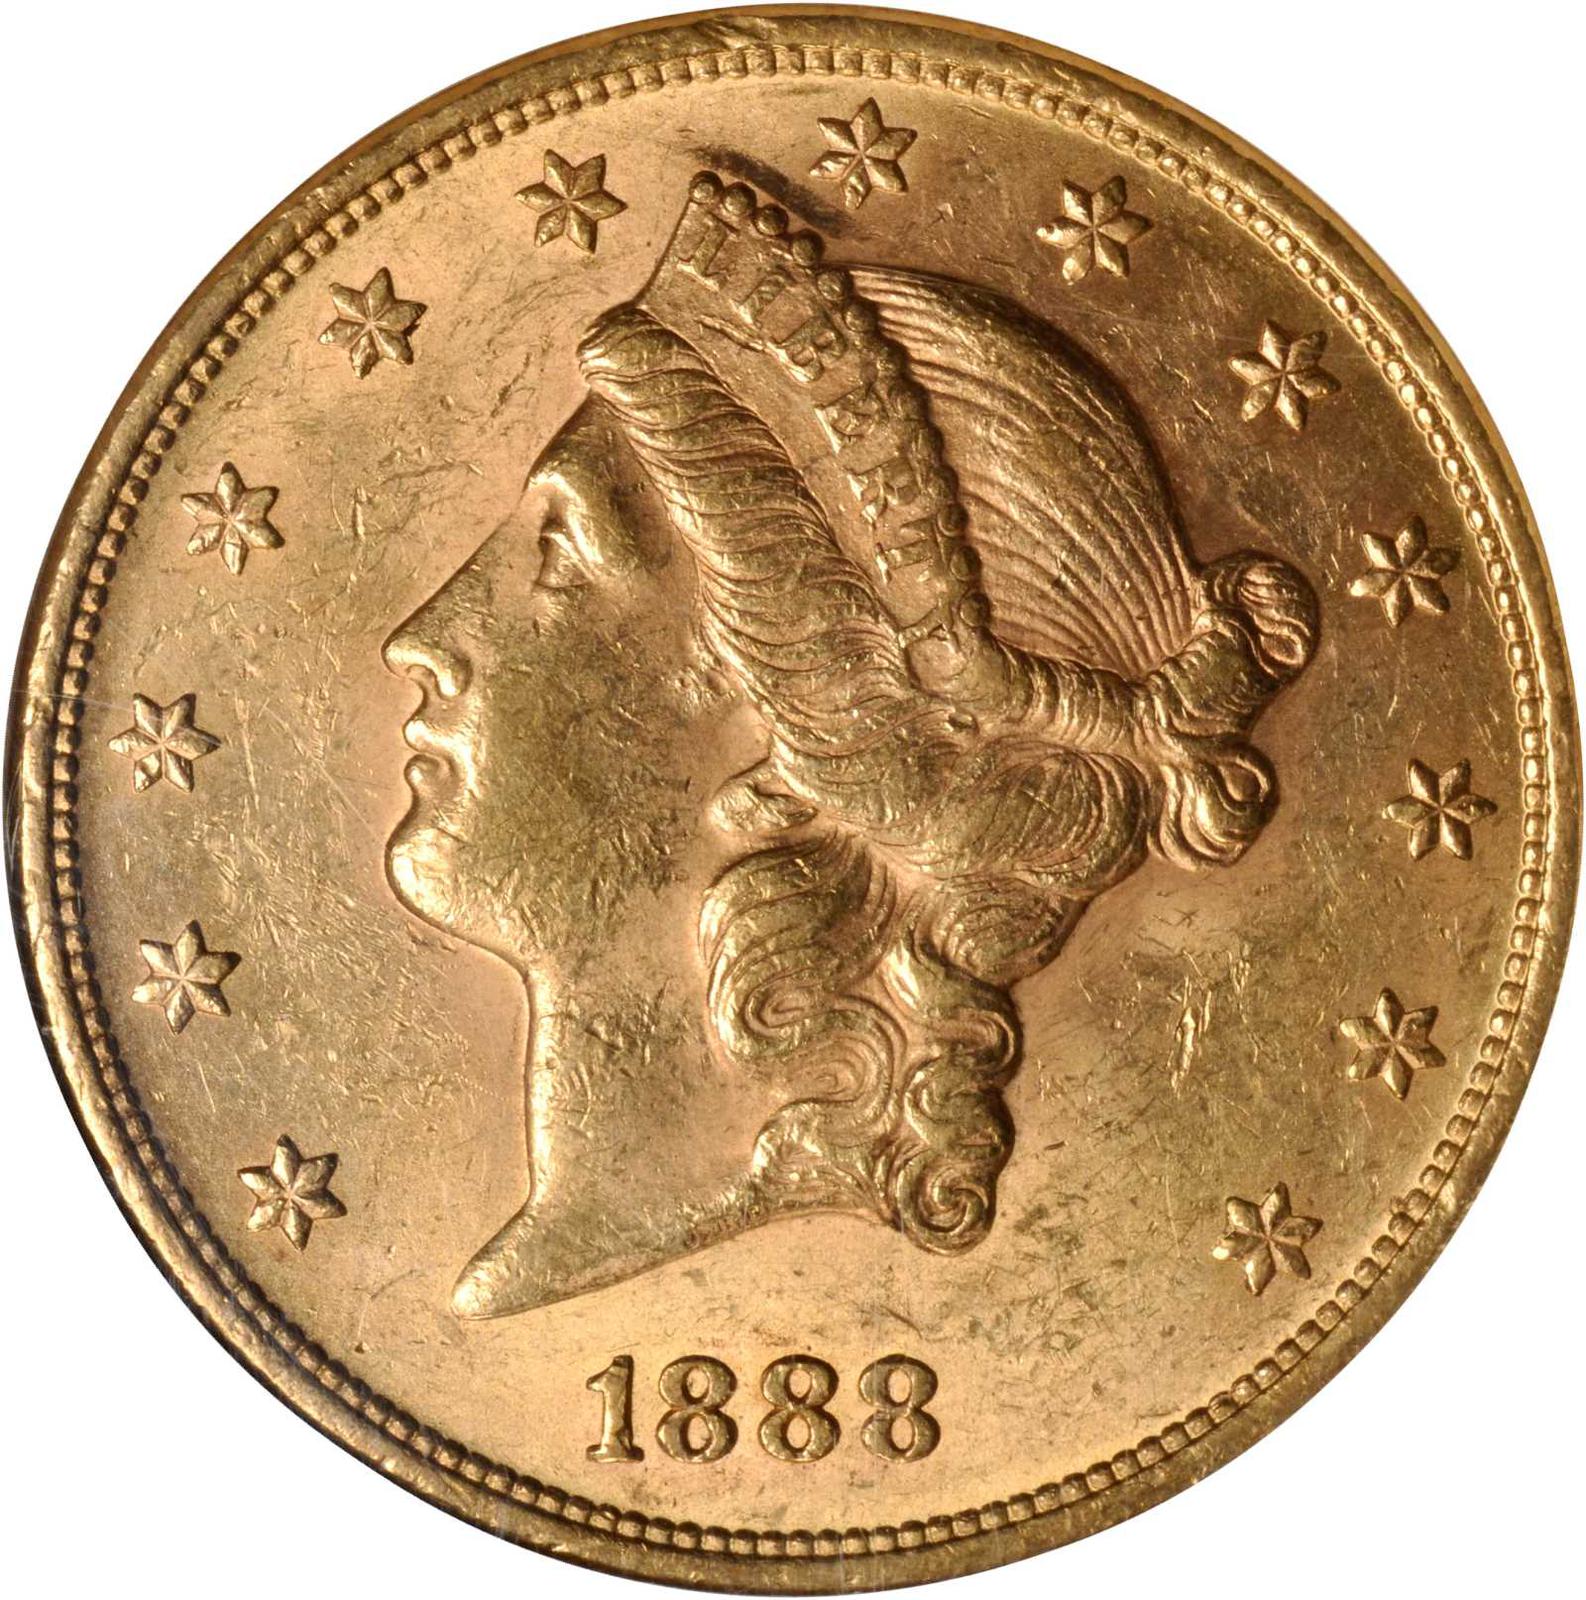 Value of 1888 $20 Liberty Double Eagle | Sell Rare Coins